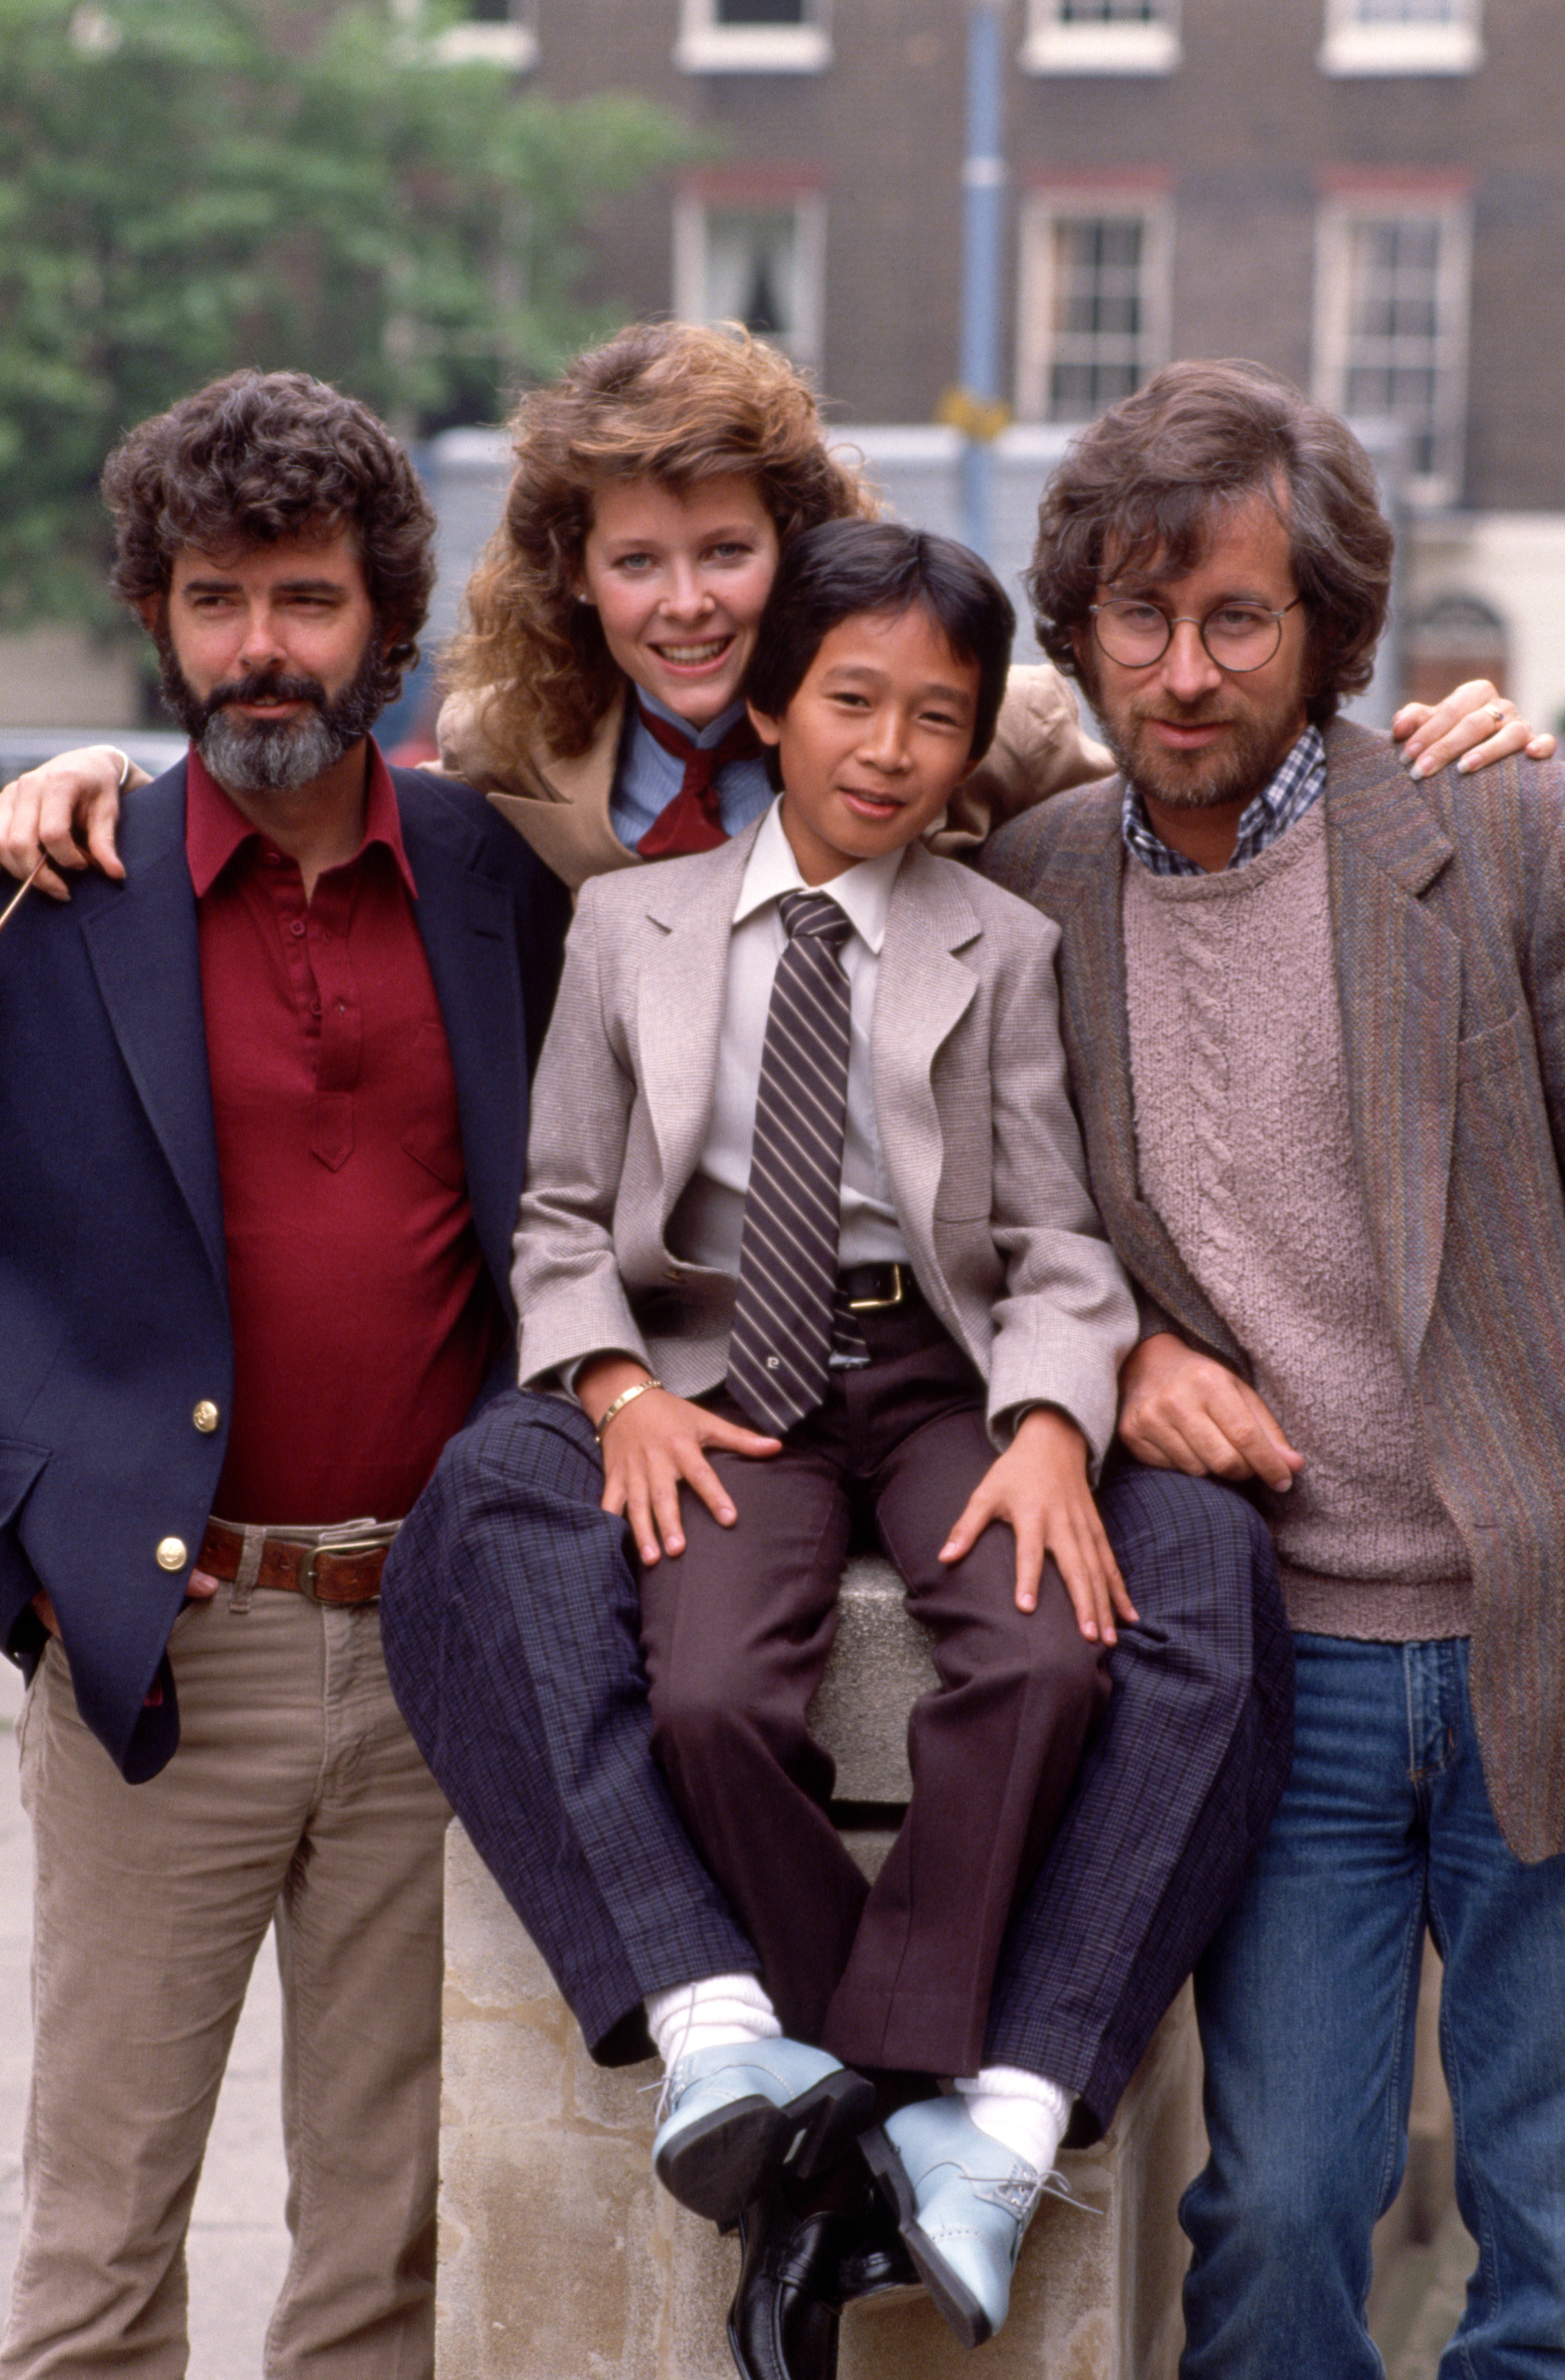 Film director Steven Spielberg, right, poses for a photograph with, left to right, Executive producer George Lucas, Actress Kate Capshaw, and Actor Ke &#x27;Jonathan Huy Quan, to promote their new film &#x27;Indiana Jones and the Temple of Doom&#x27;